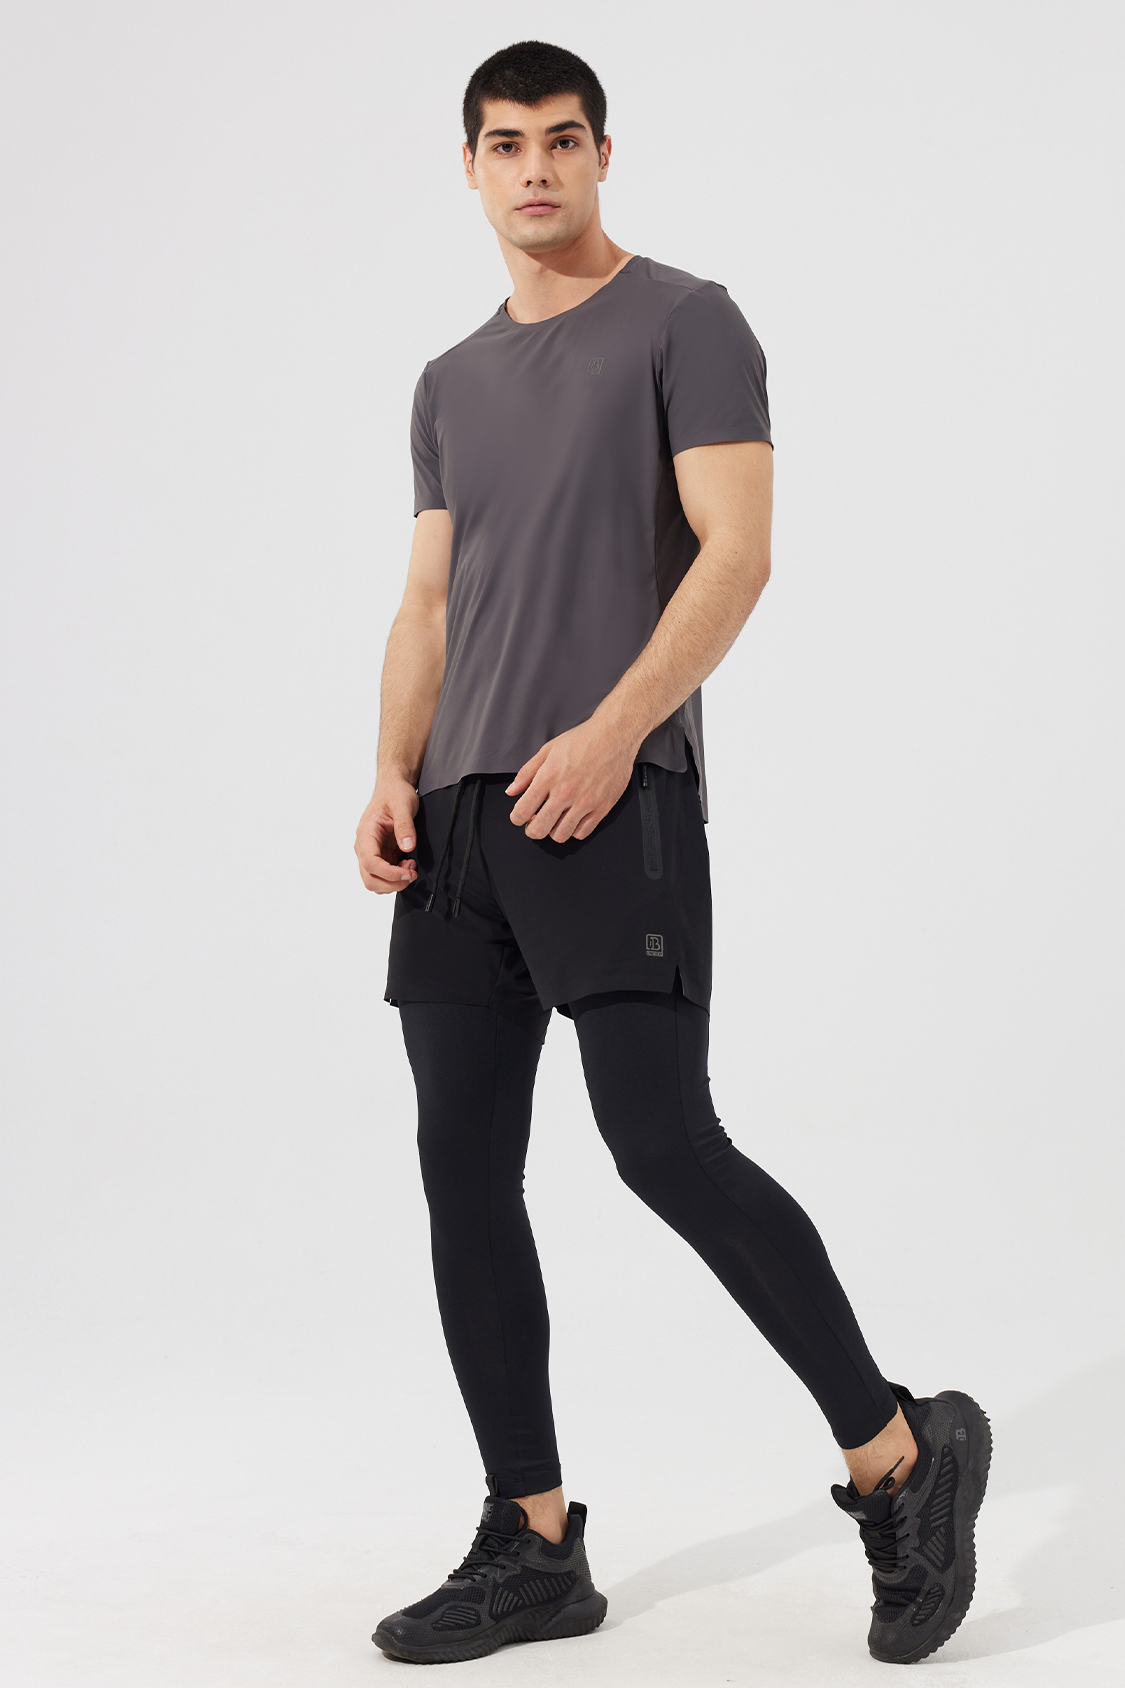 Ice-Tech Quick Dry Dual-Layer Pants For Men